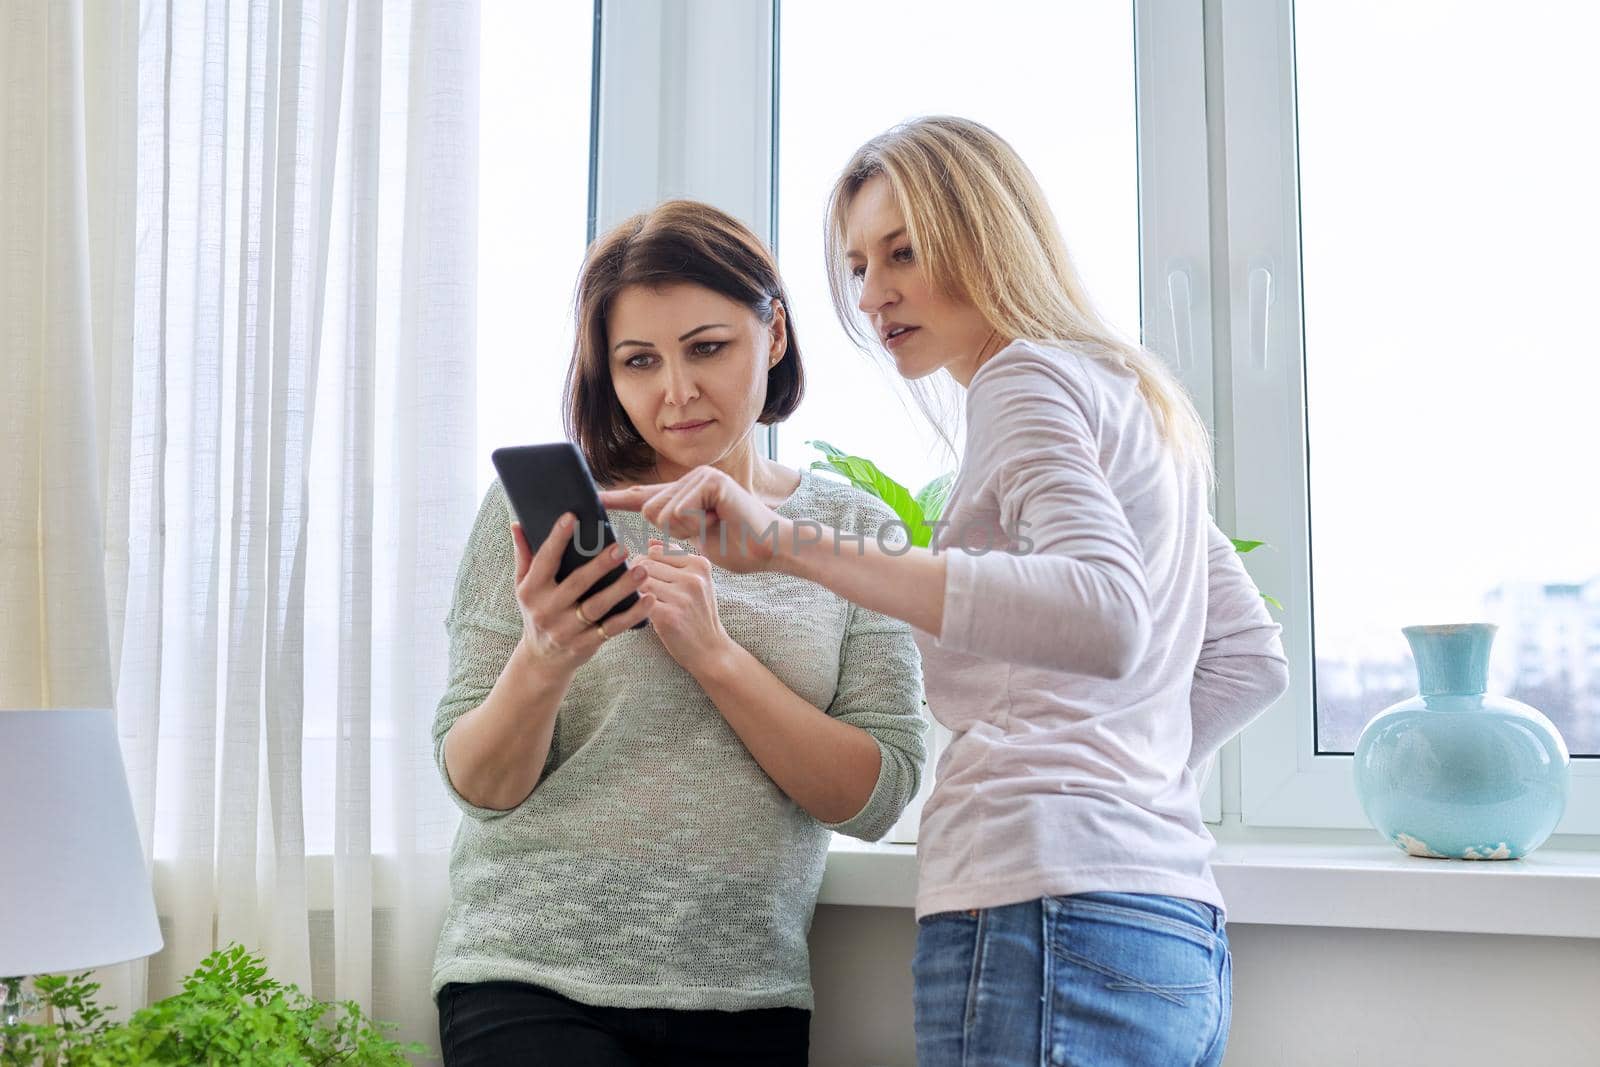 Two middle-aged women friends looking together at smartphone screen. Females at home near window in winter season. Relationship, lifestyle, leisure, friendship, technology, mature people concept